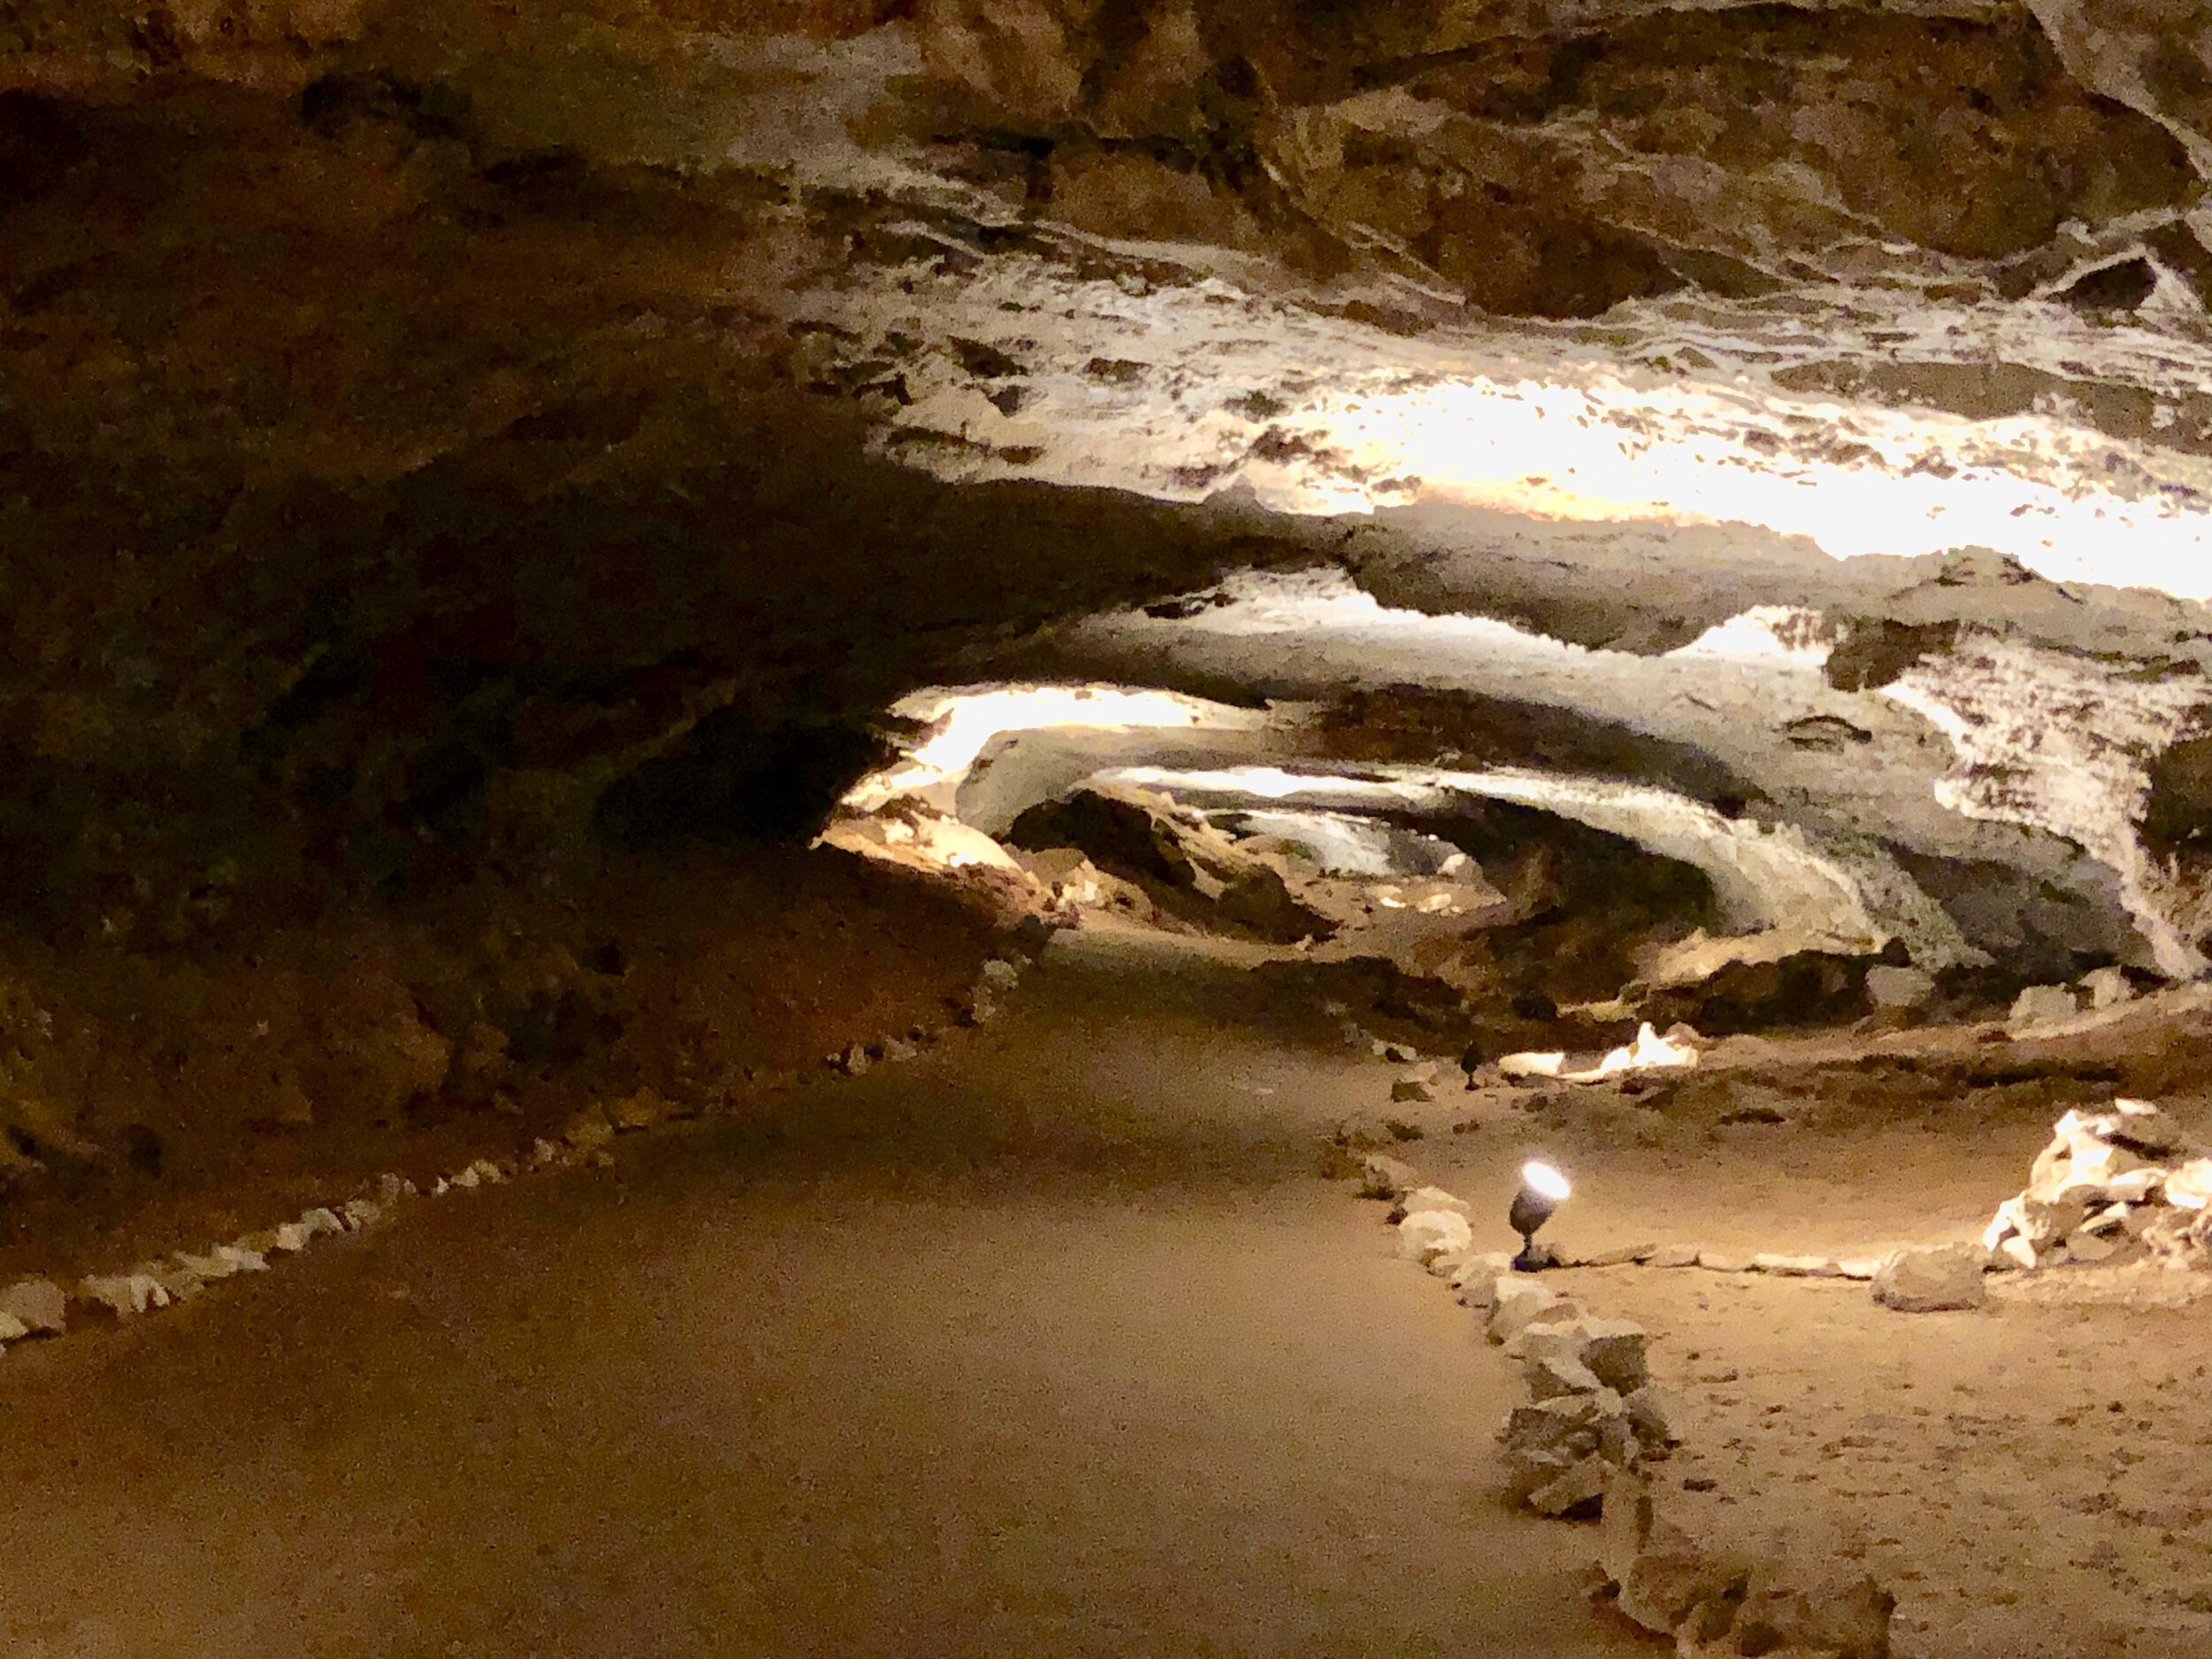 Mammoth Cave celebrates the longest known cave system in the world.